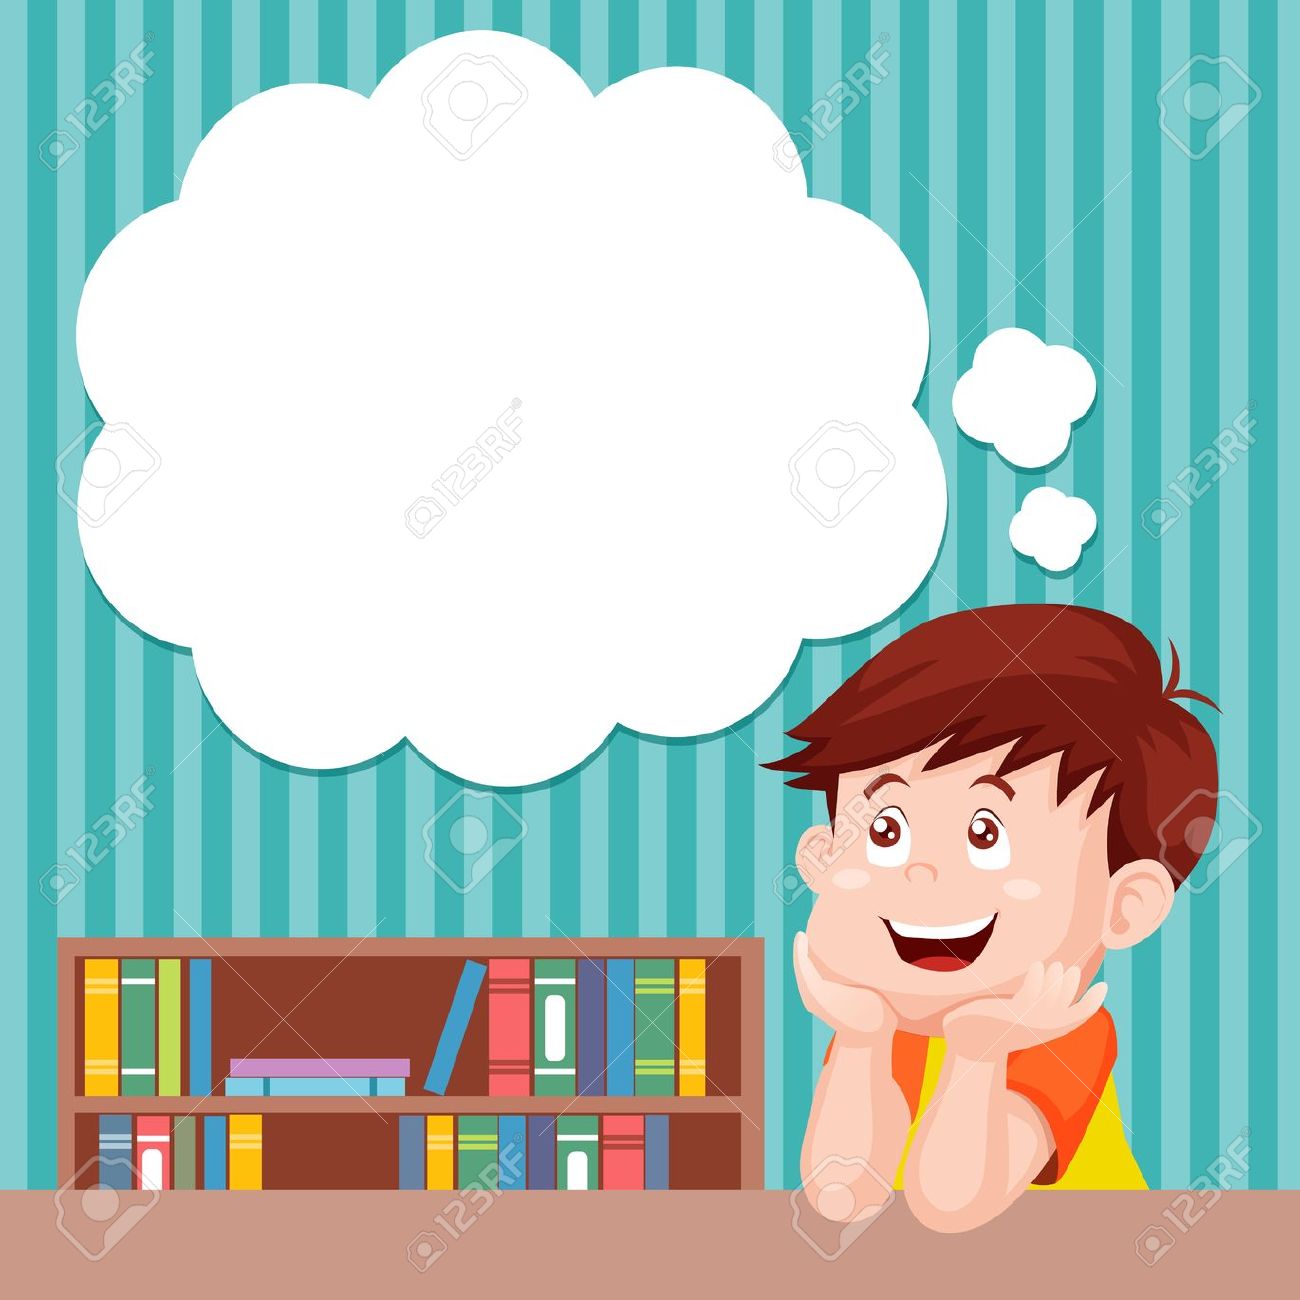 Child Thinking Clipart #14278. Cartoon Boy Thinking With White Bubble For Text Royalty Free